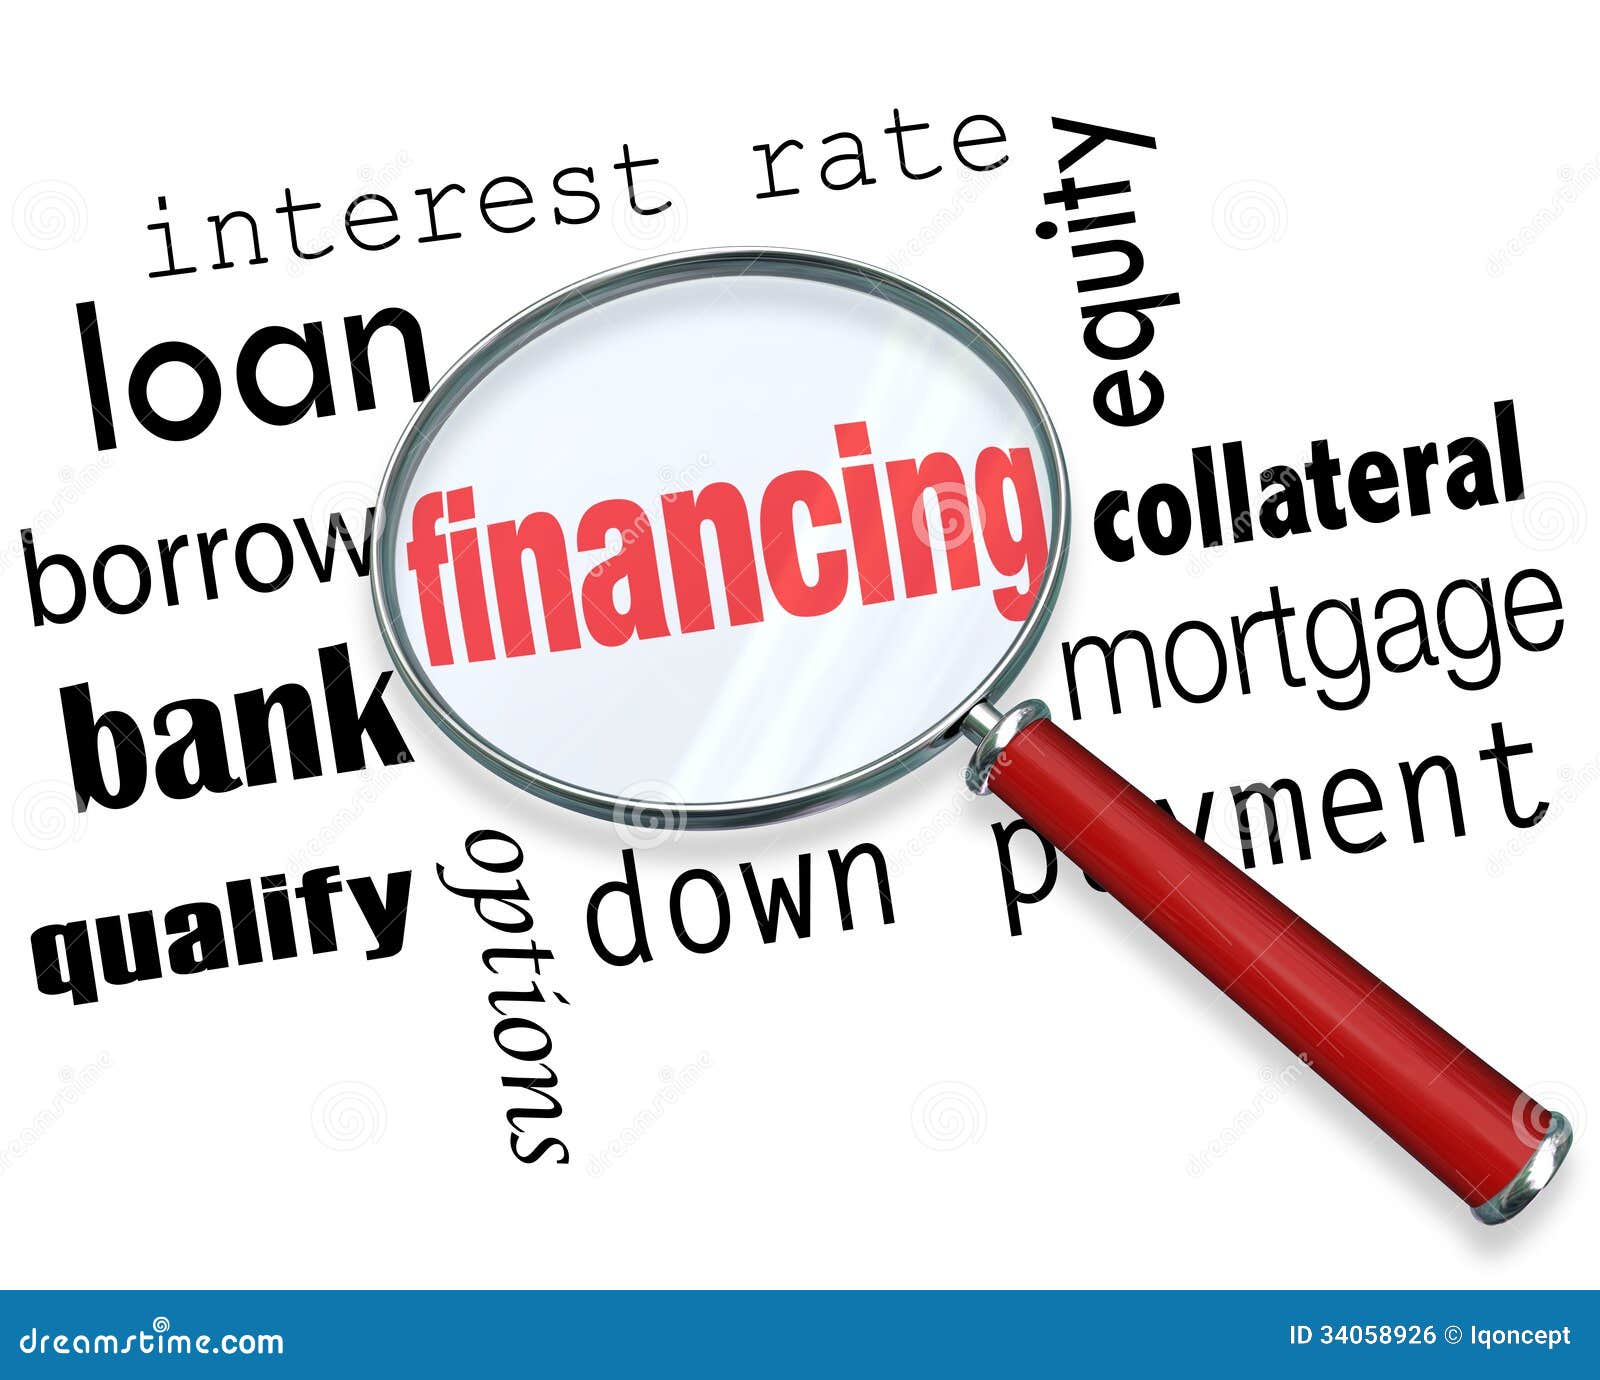 financing-magnifying-glass-words-load-mortgage-word-under-terms-like ...